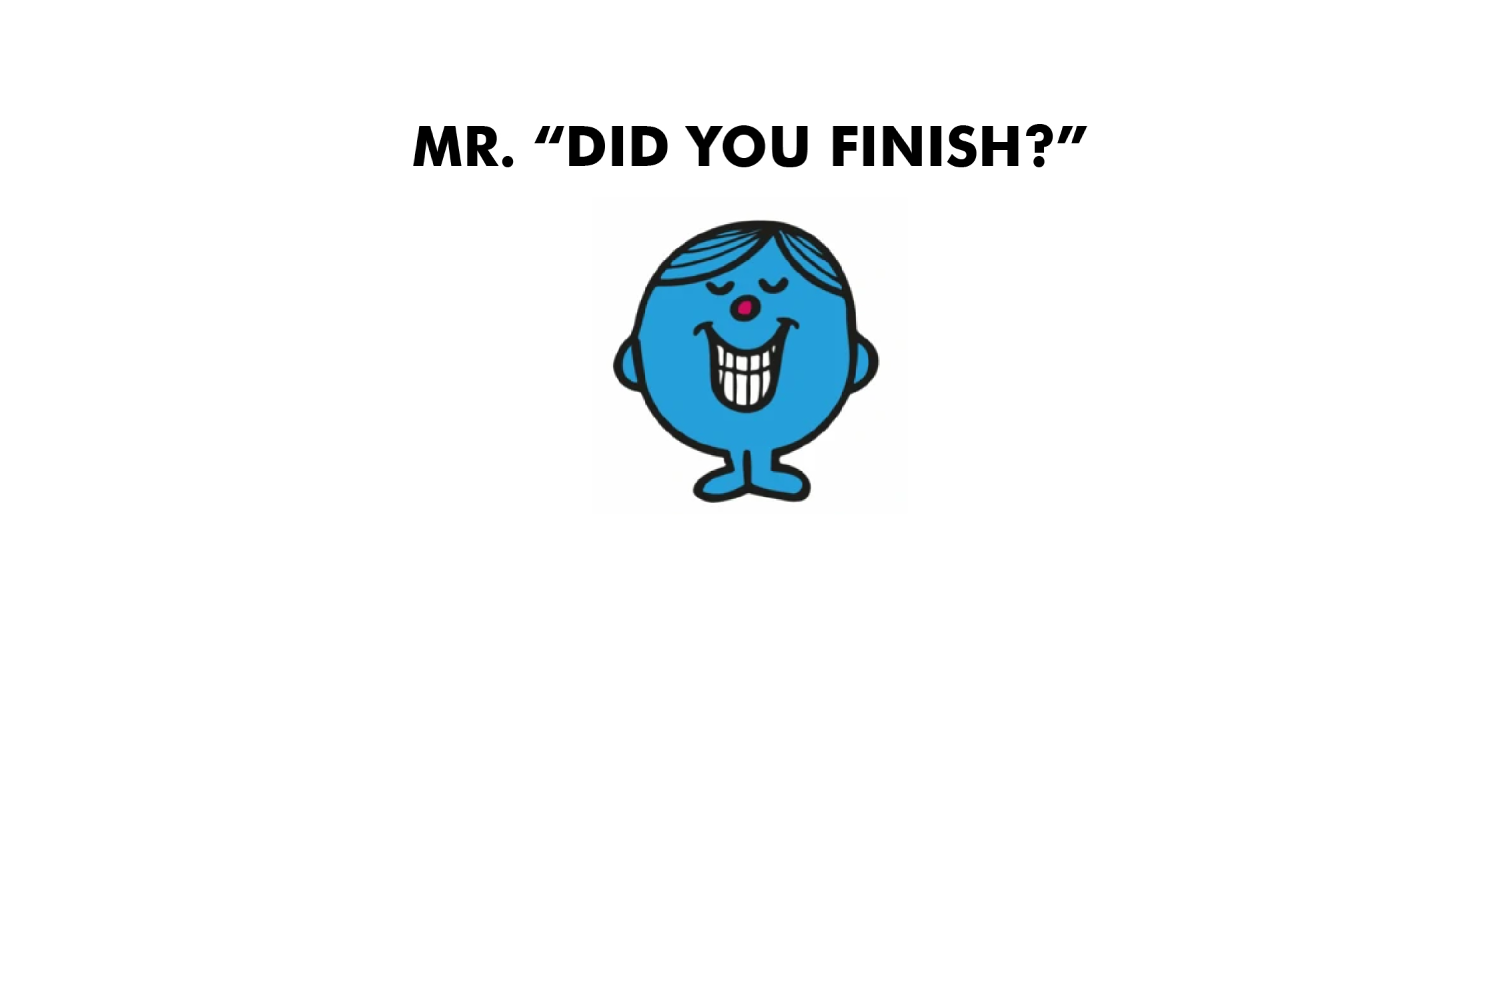 Mr. Did You Finish?